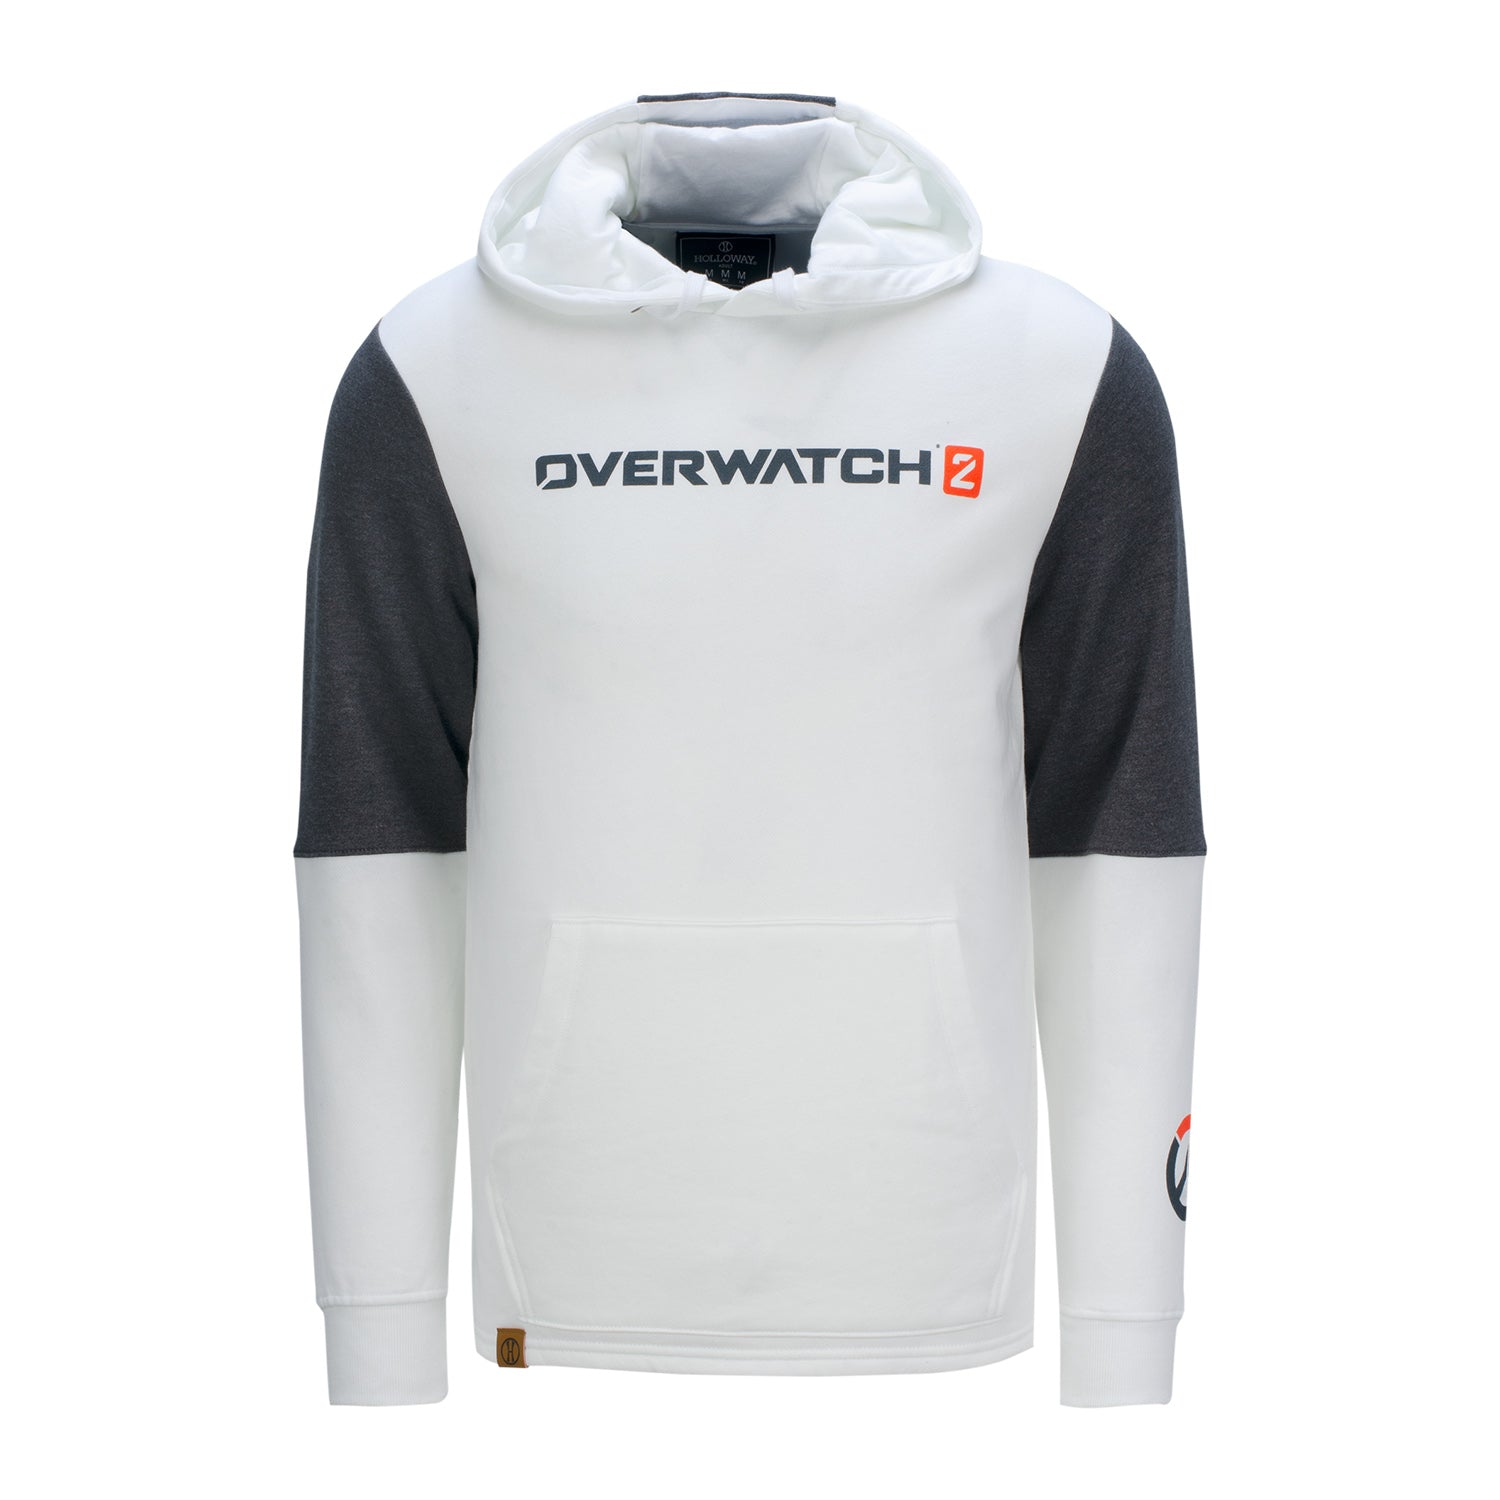 Overwatch 2 White Colourblock Hoodie - Front View with Overwatch 2 Logo